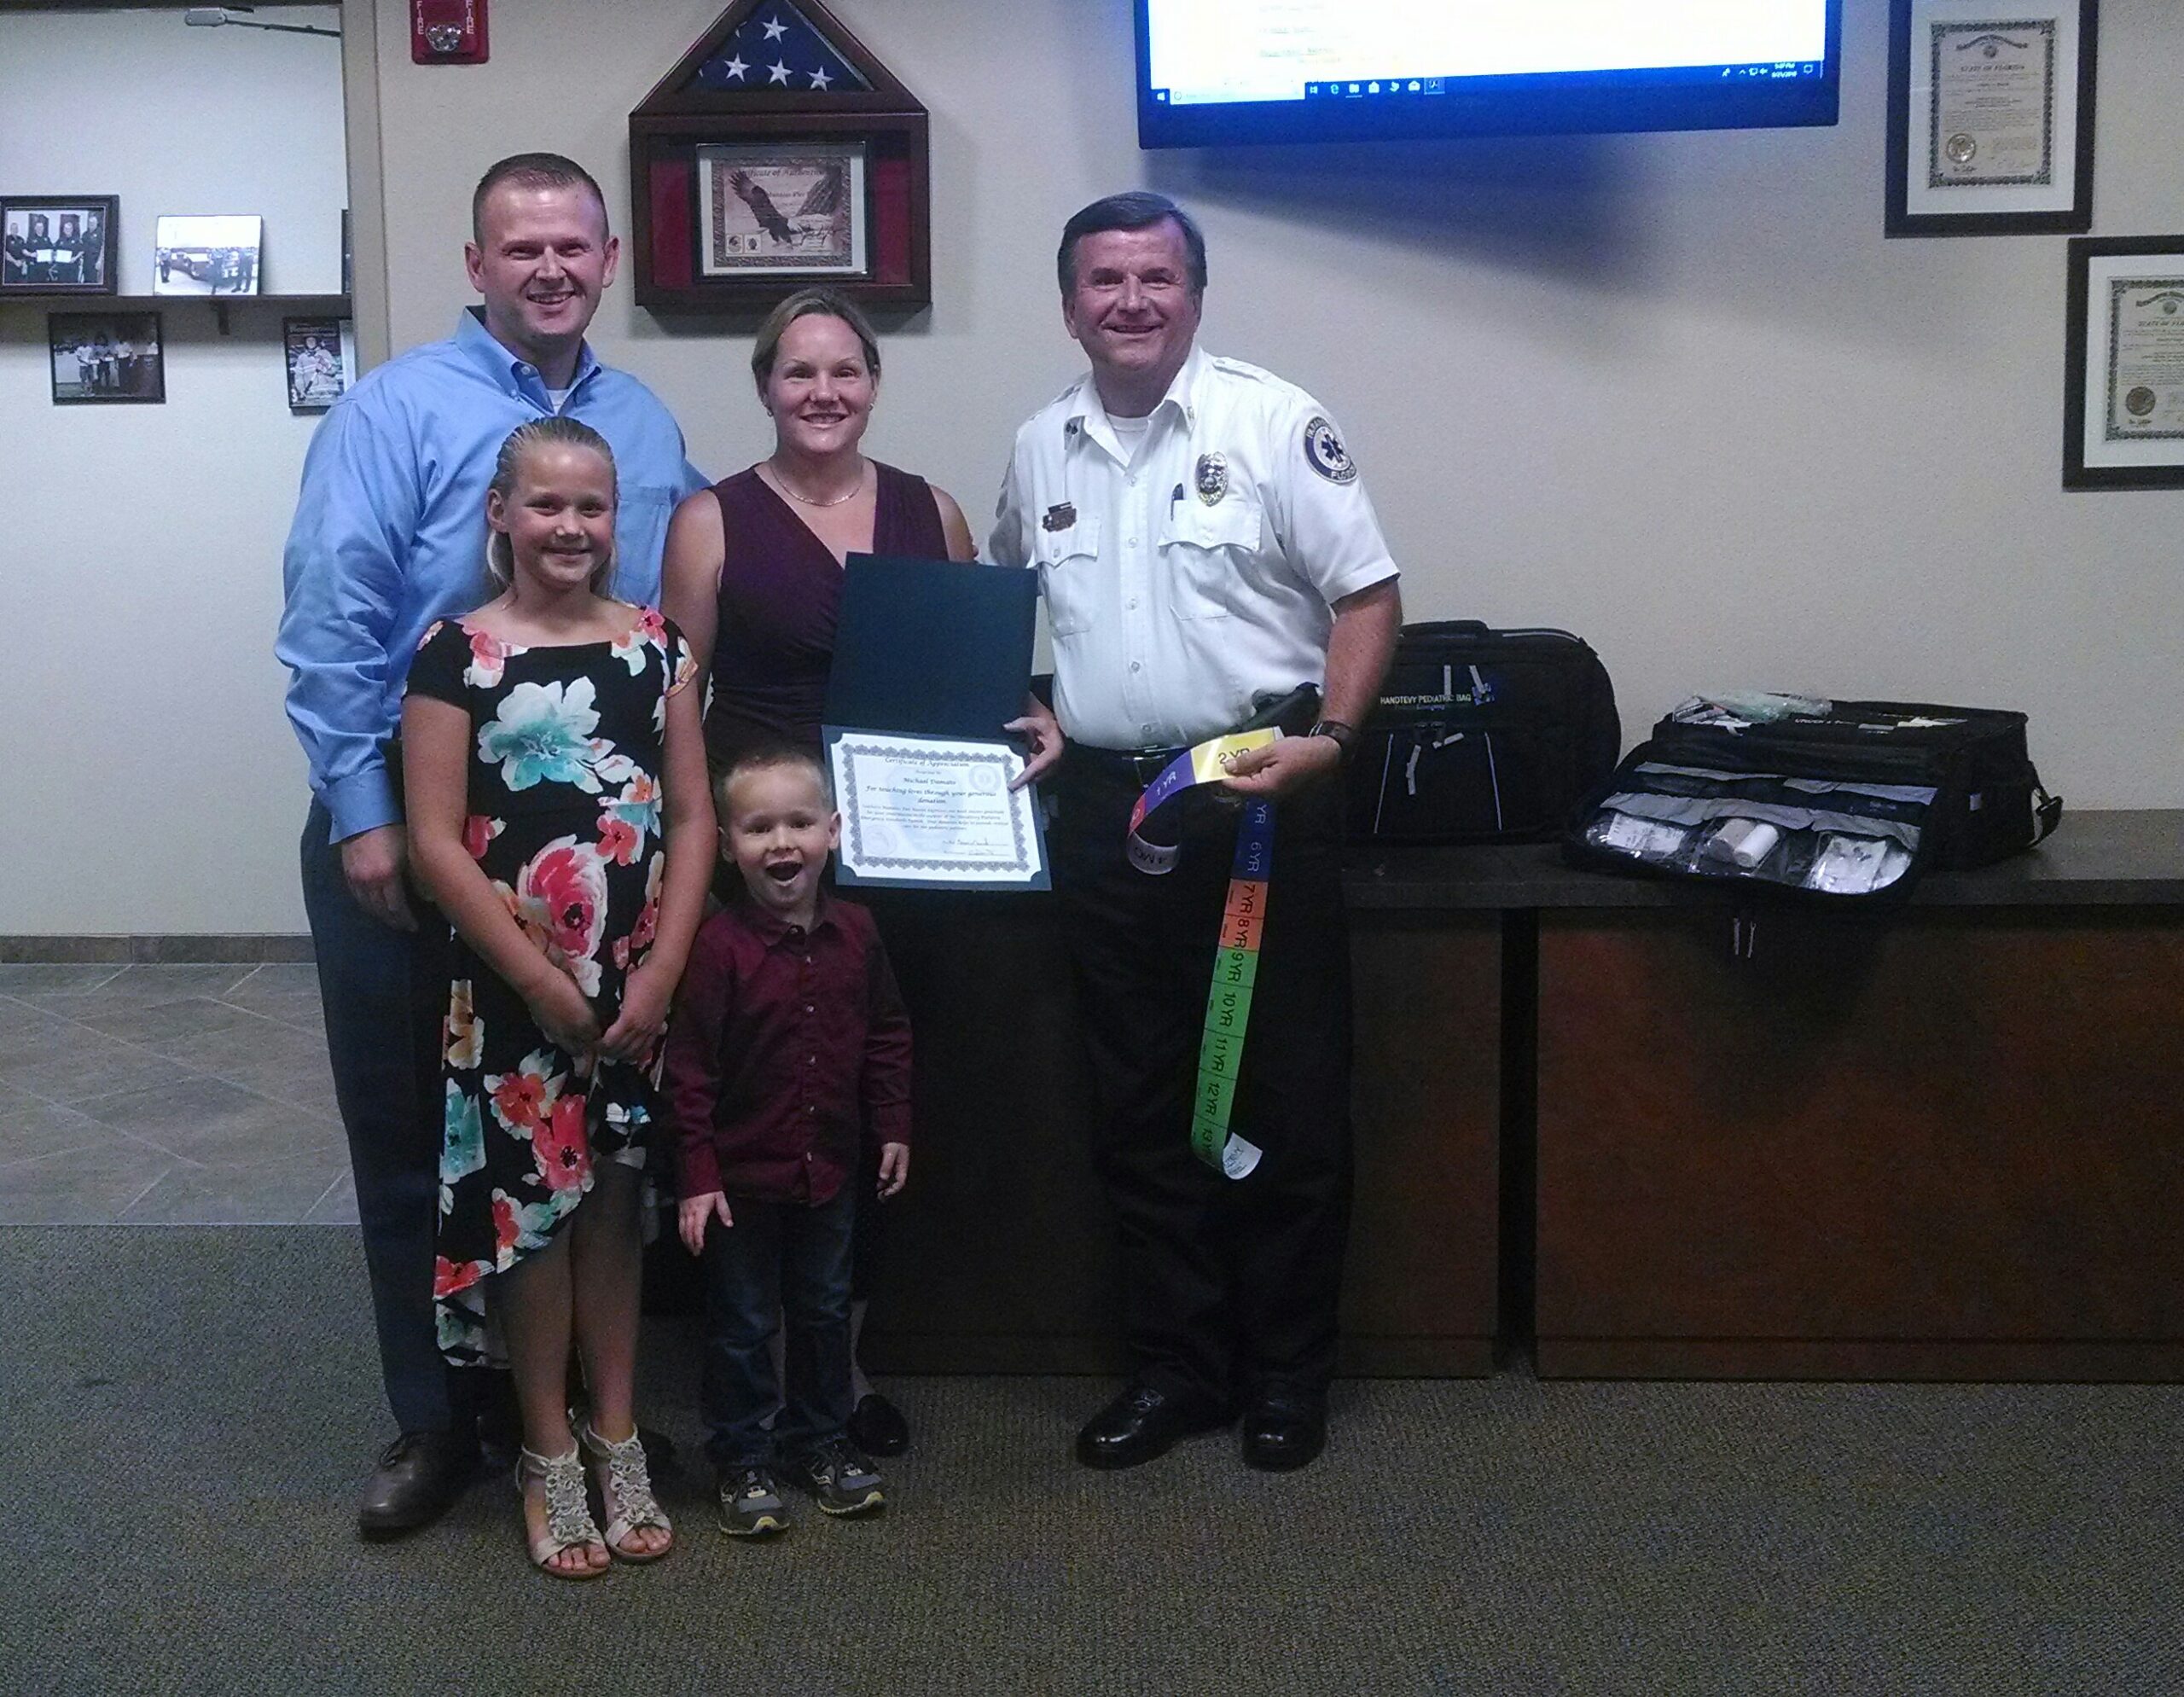 Southern Manatee Fire Rescue District Receives Generous Donation to Purchase the Handtevy Pediatric Emergency Systems for all of their 1st Out Fire Apparatus